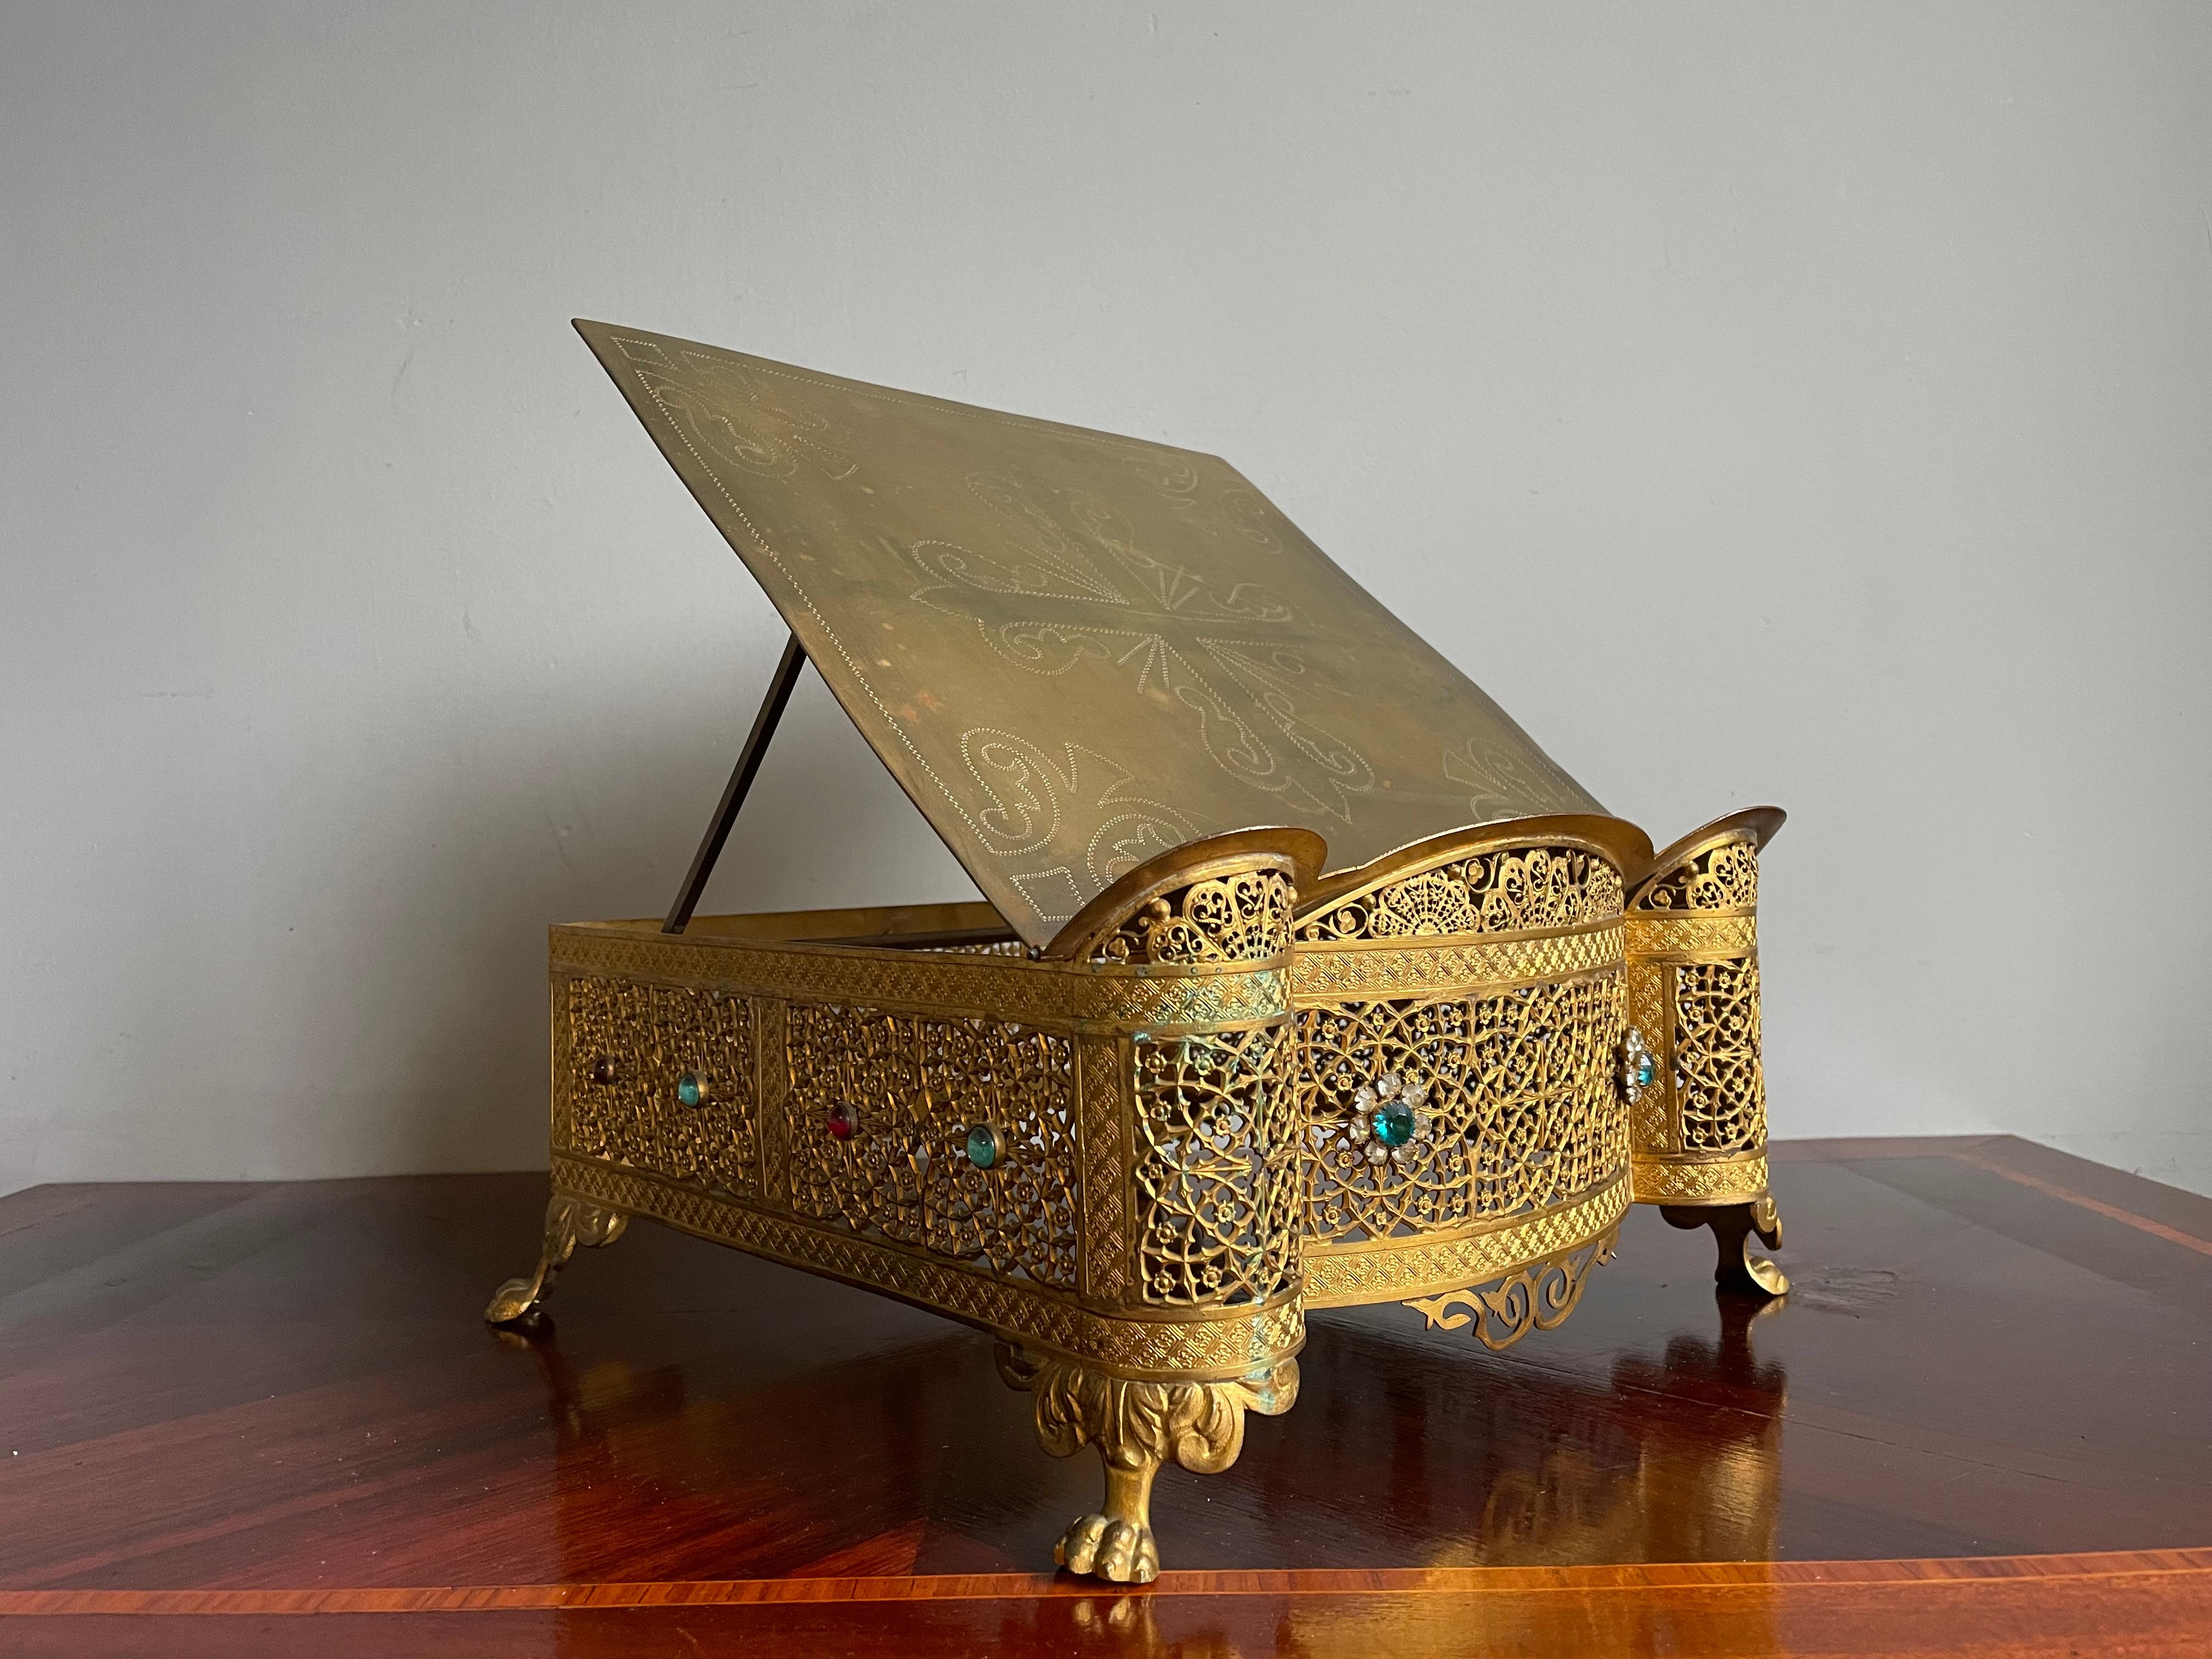 Stunning 19th century Gothic church bible or missal stand with 'gemstones'.

This rare, late 1800s, gilt bronze bible stand has beautiful details and it is in remarkably good condition. The stunning design with the extremely detailed and gilt Gothic